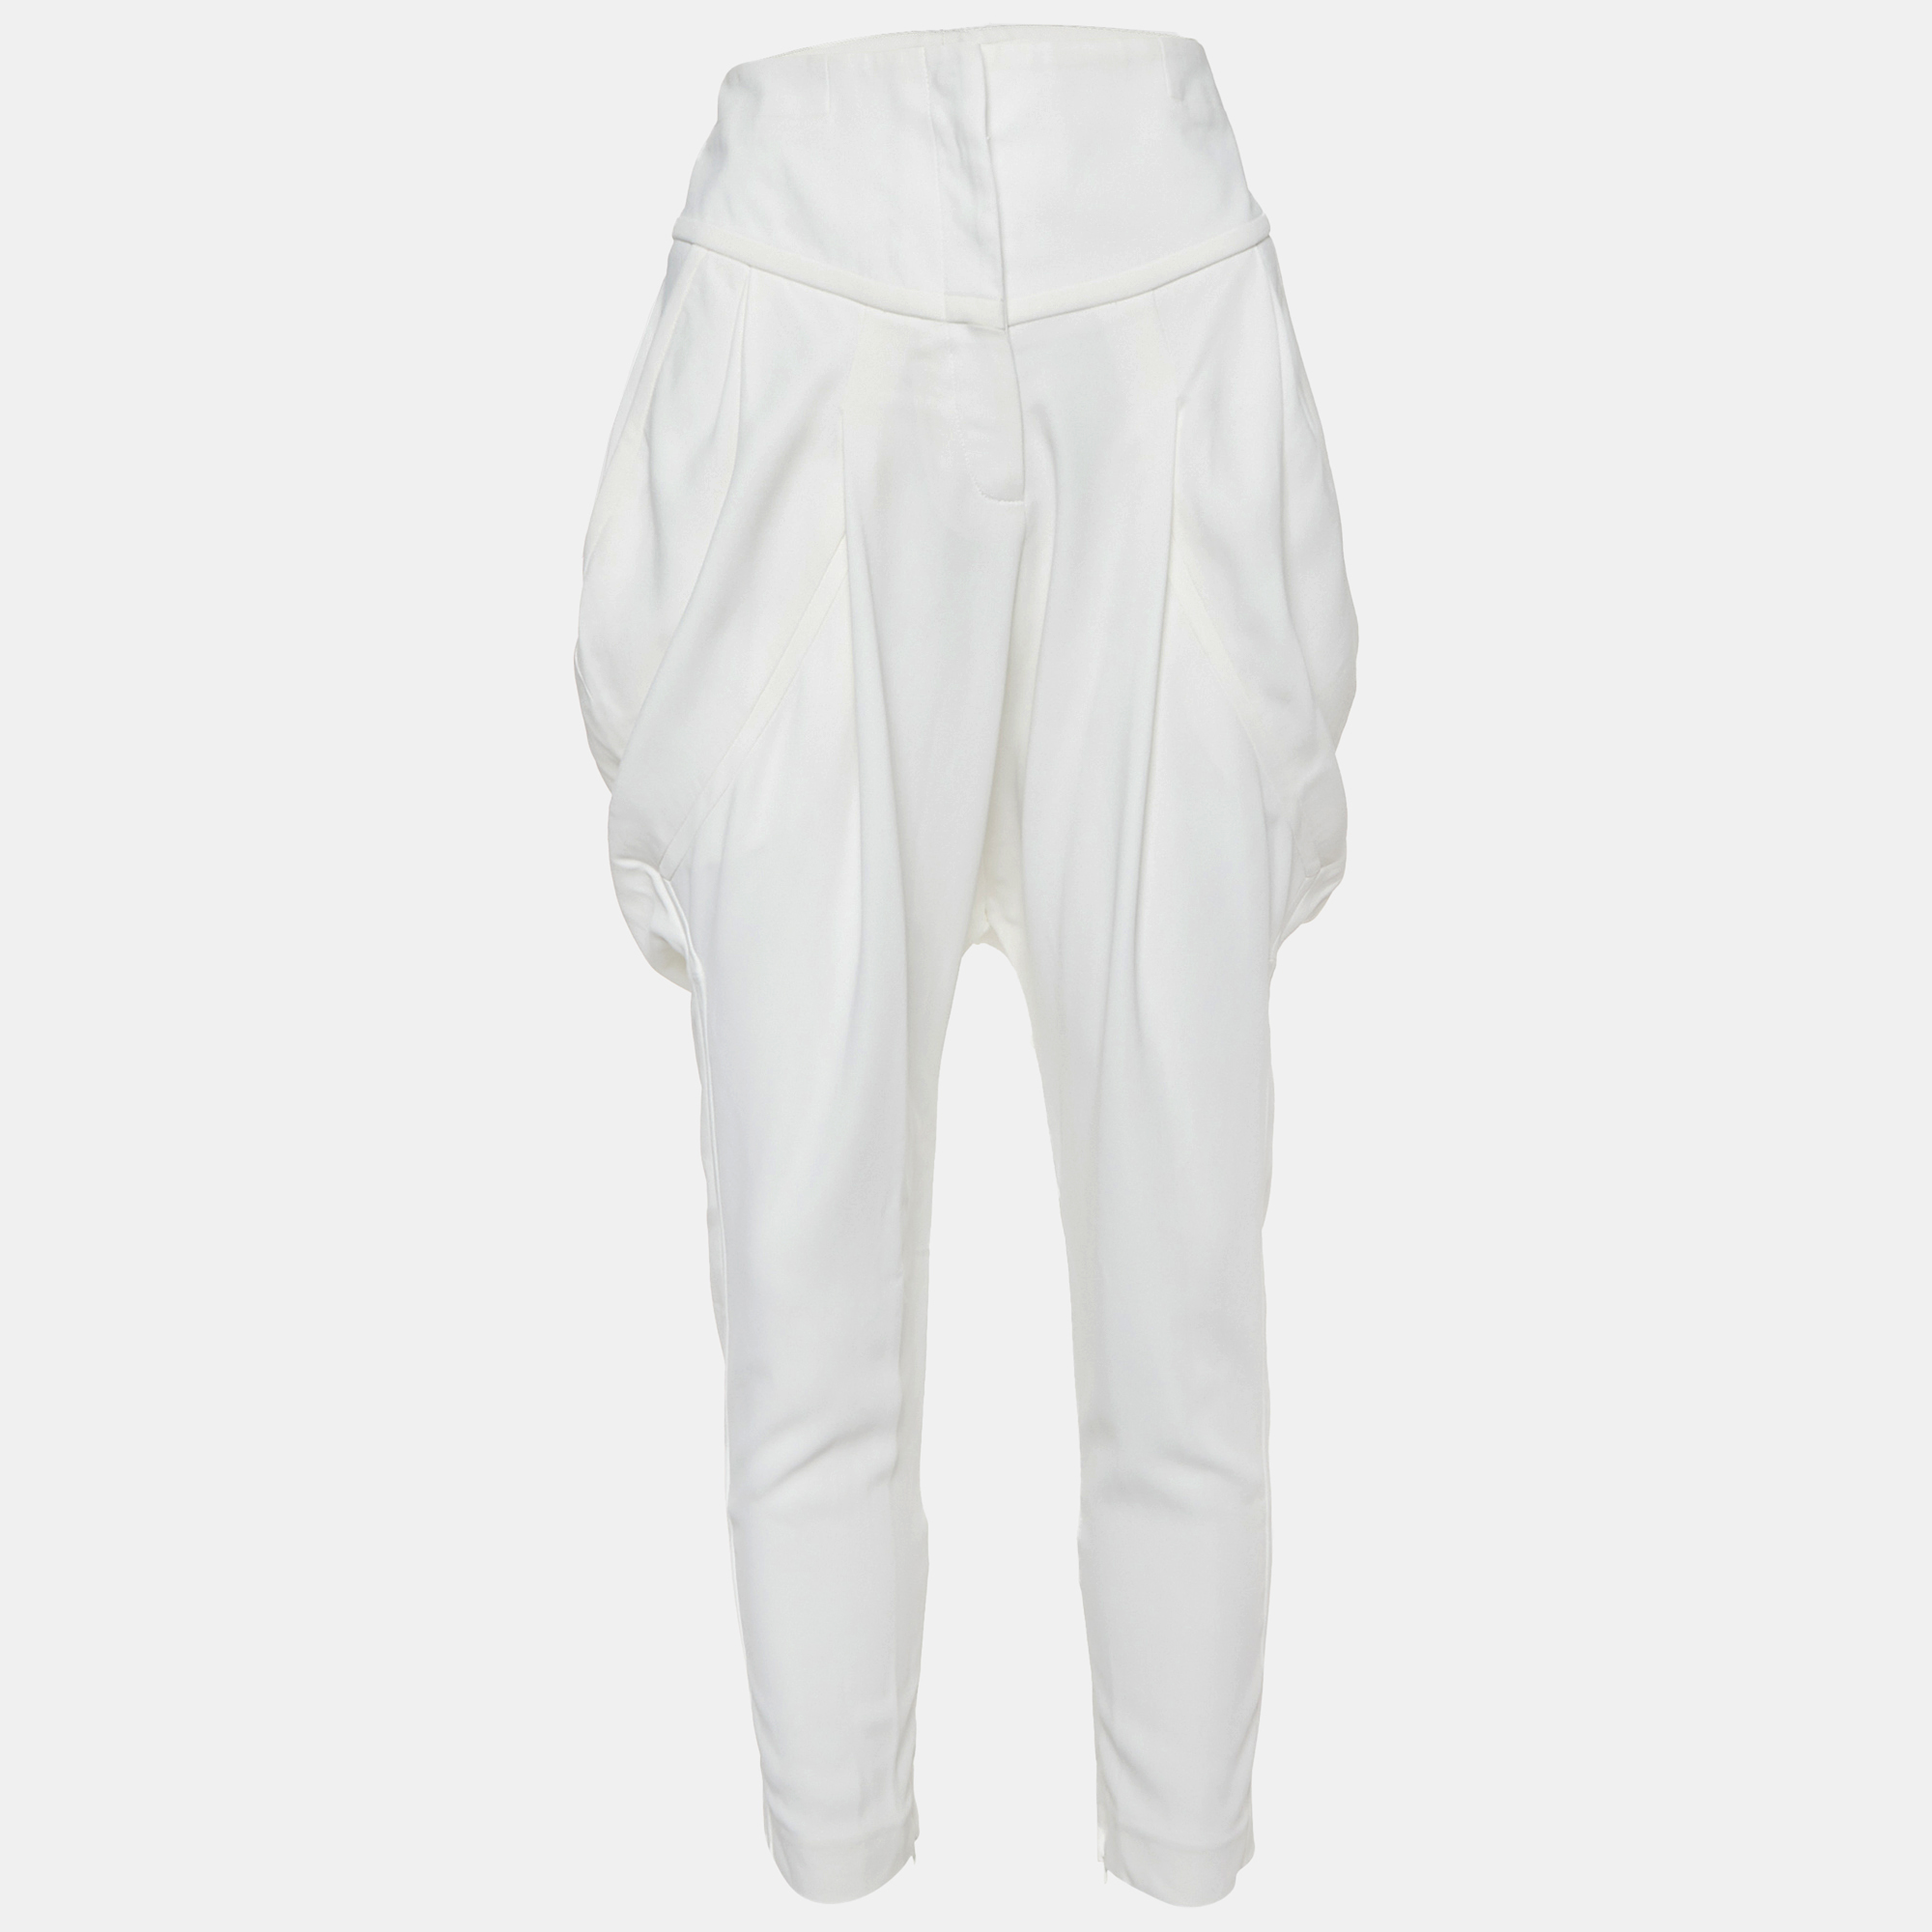 Givenchy off-white crepe high waist tapered leg pants m